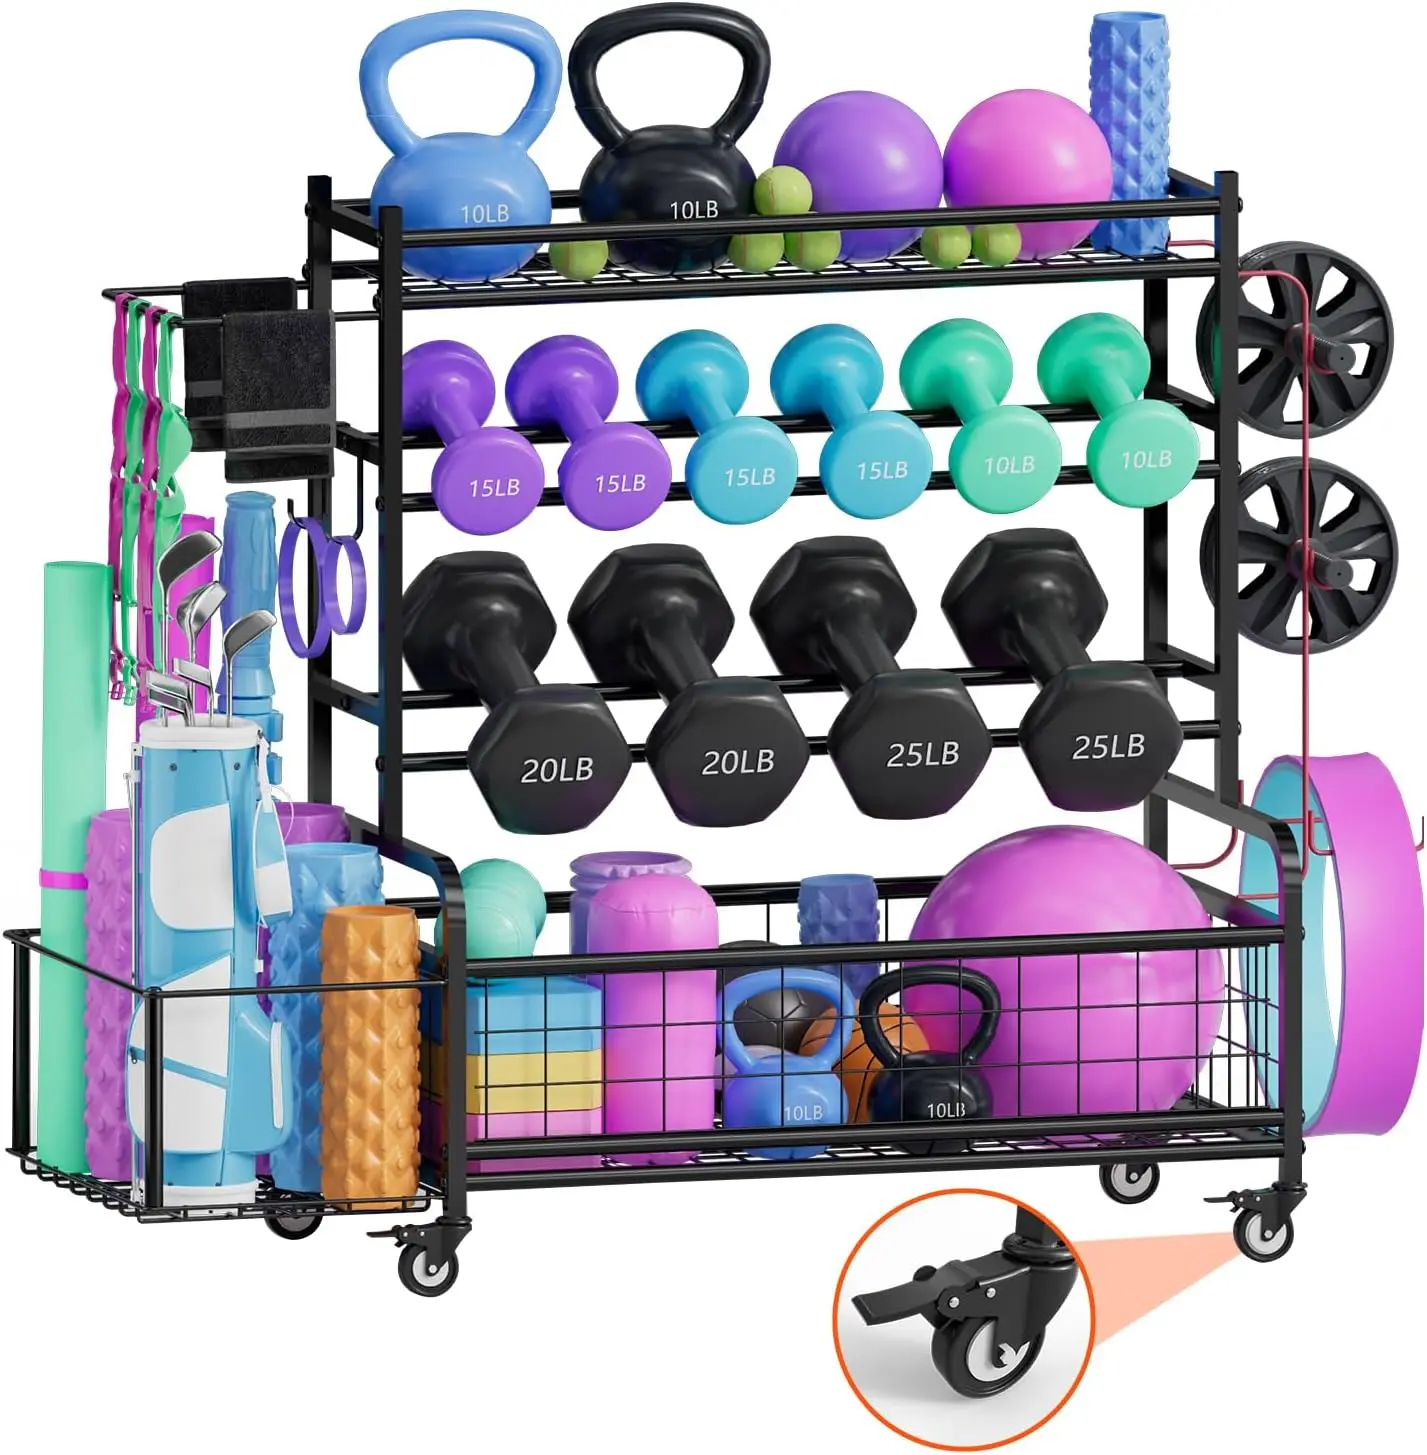 

Weight Rack for Dumbbells, Dumbbell Rack Weight Stand, Home Gym Storage 550 LBS for Yoga Mat Kettlebells - Storage Organizer &a